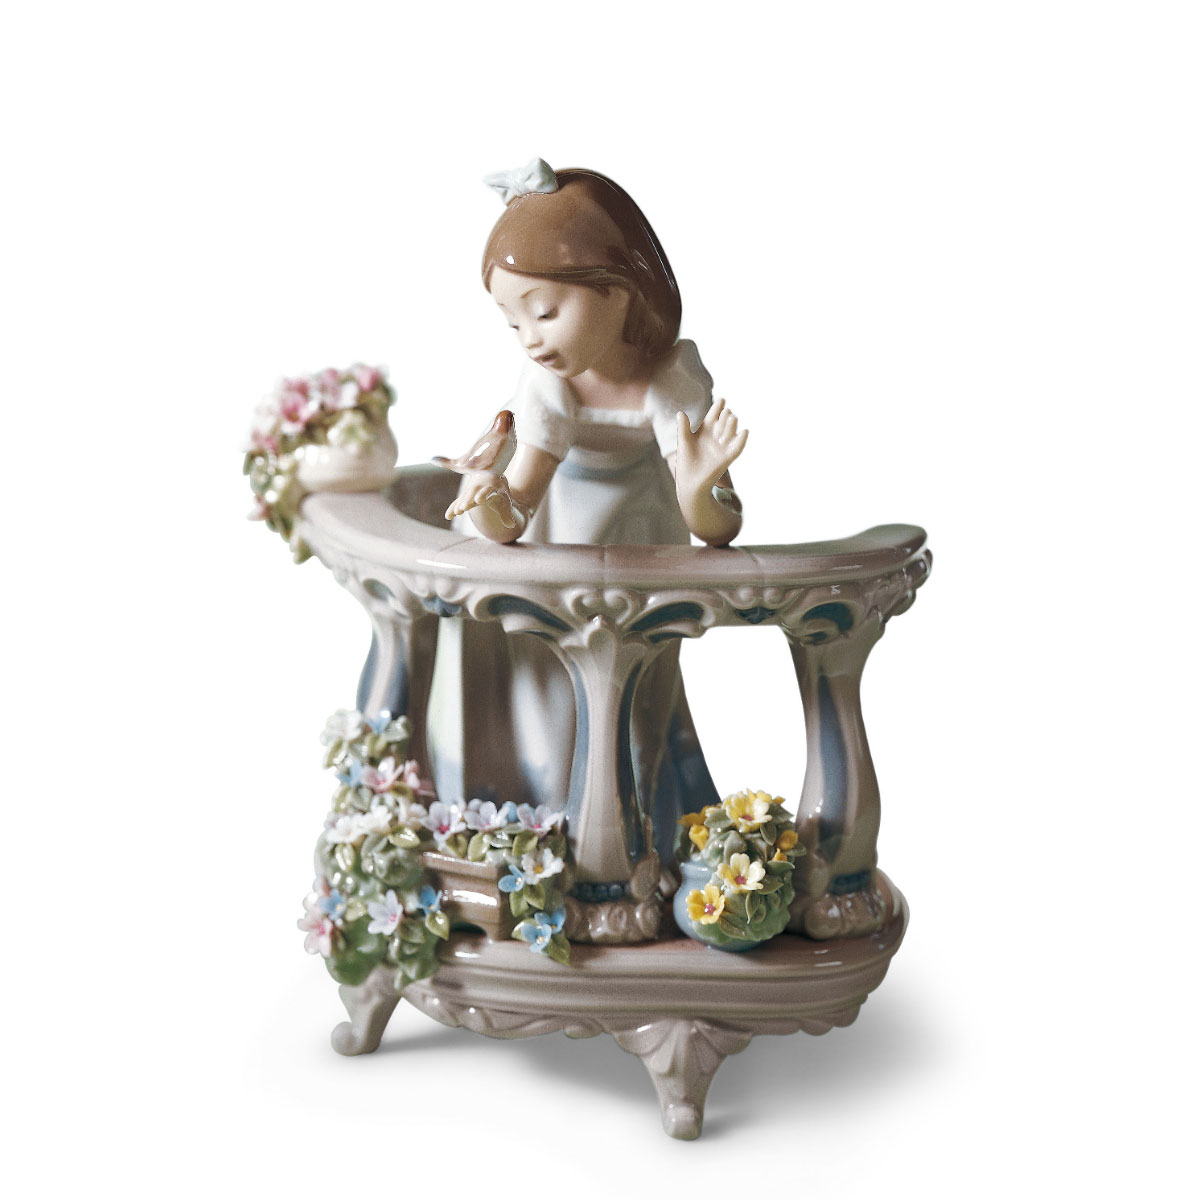 Lladro Classic Sculpture, Morning Song Girl Figurine